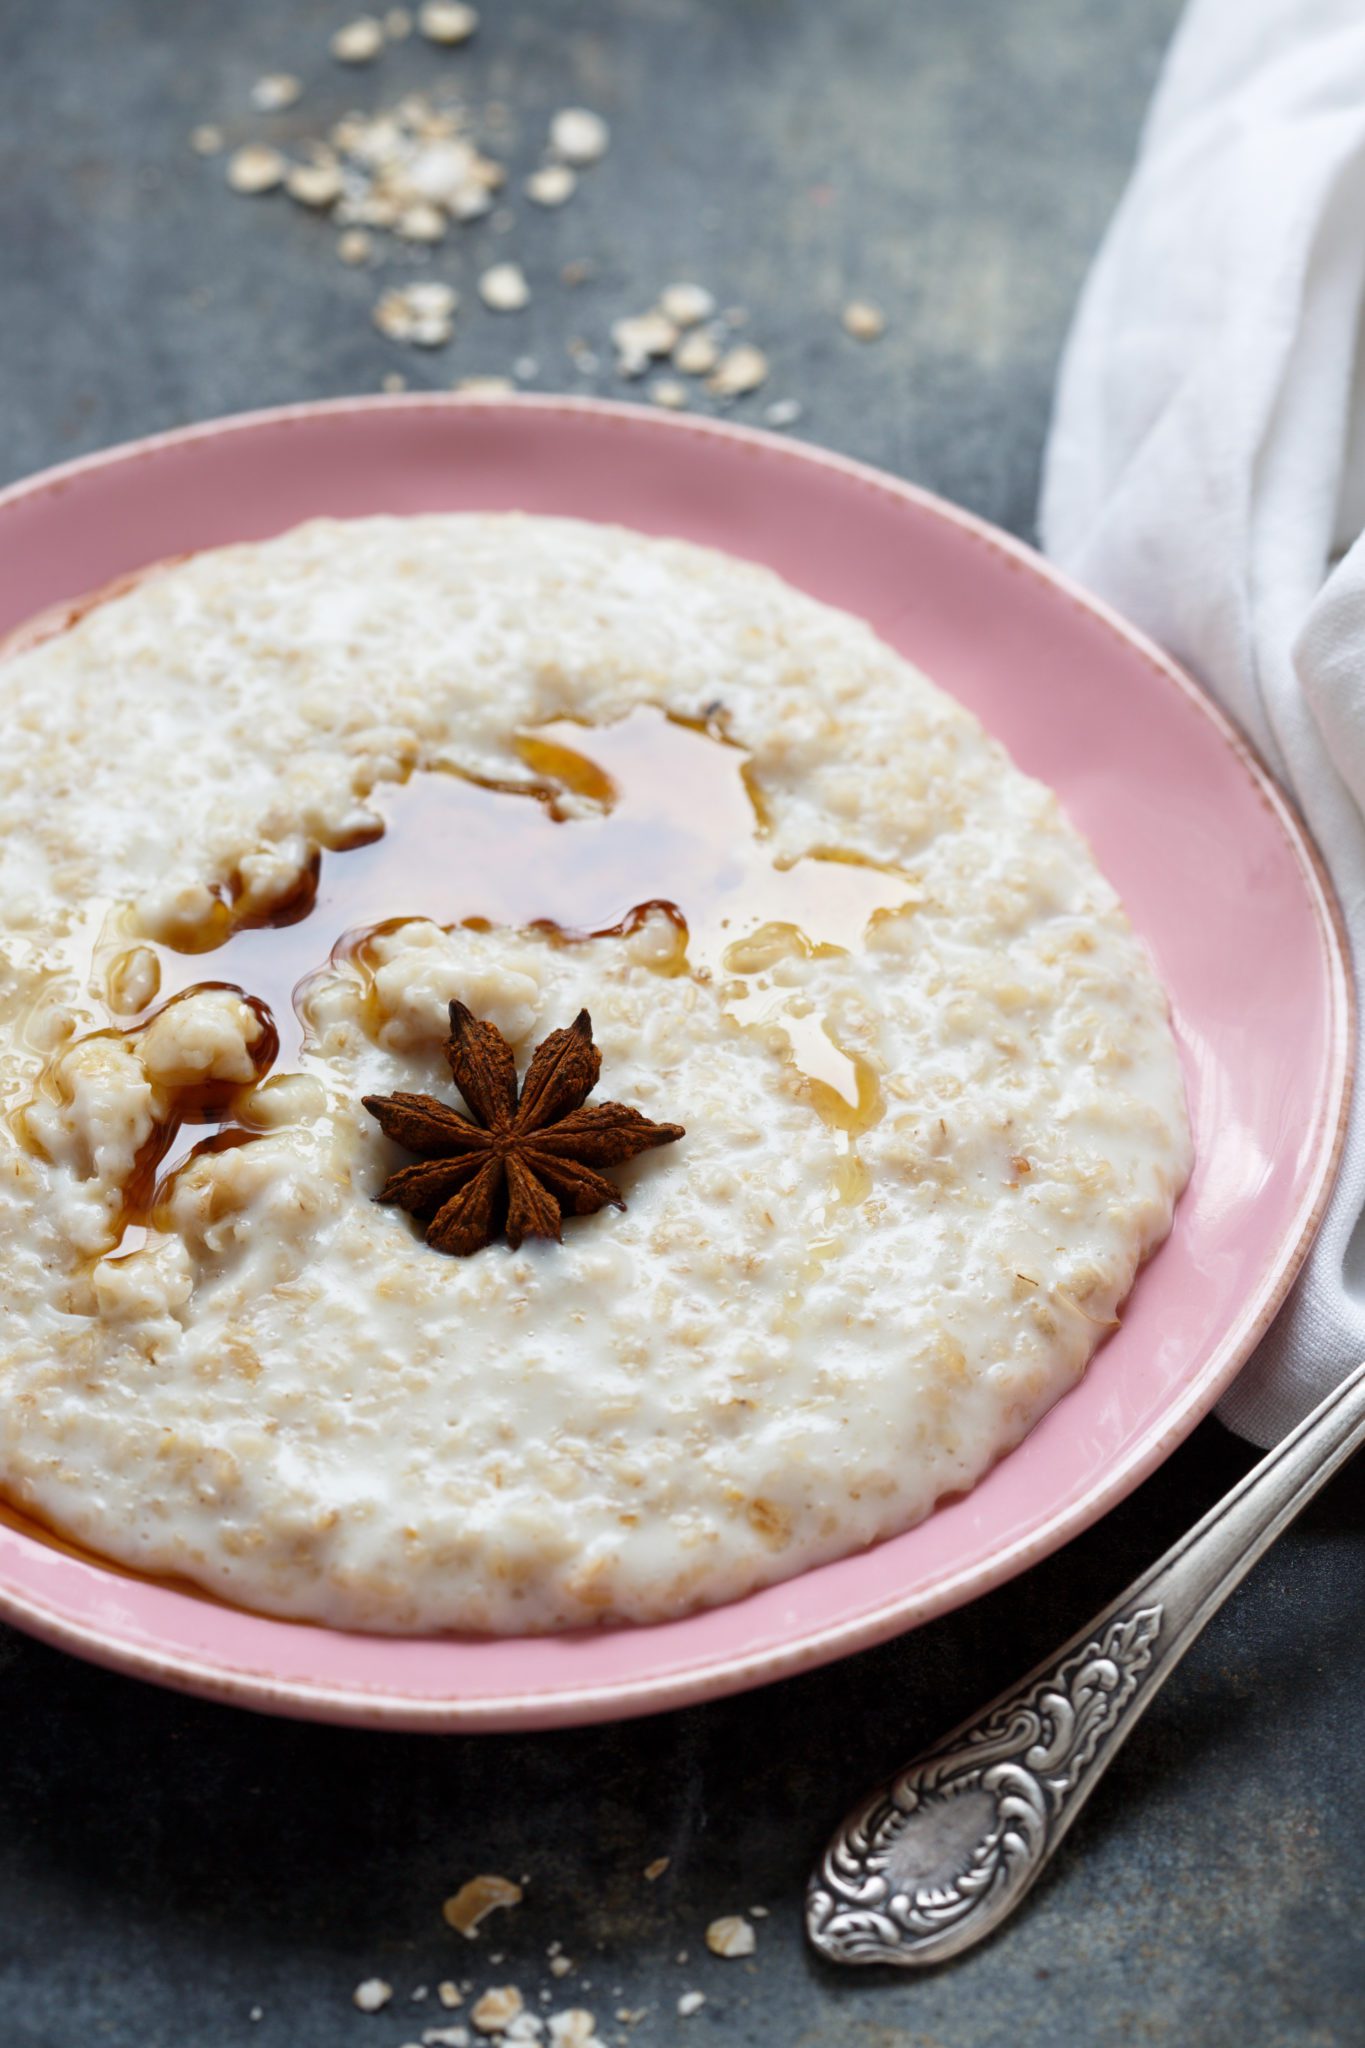 CREAMY OATMEAL WITH MAPLE SYRUP